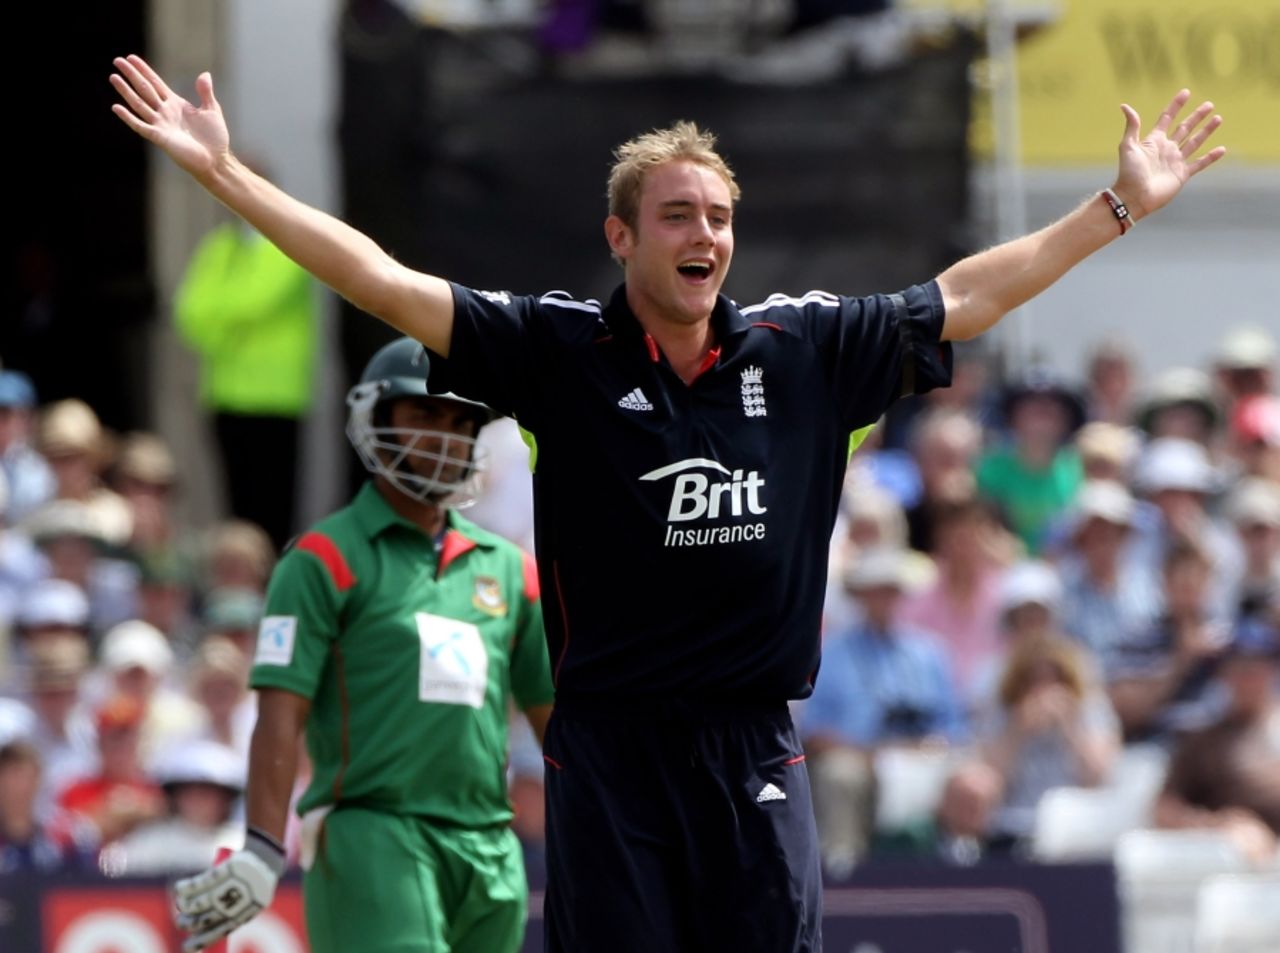 Stuart Broad brought an end to Tamim Iqbal's aggressive knock in his second over, England v Bangldesh, 1st ODI, Trent Bridge, July 8, 2010